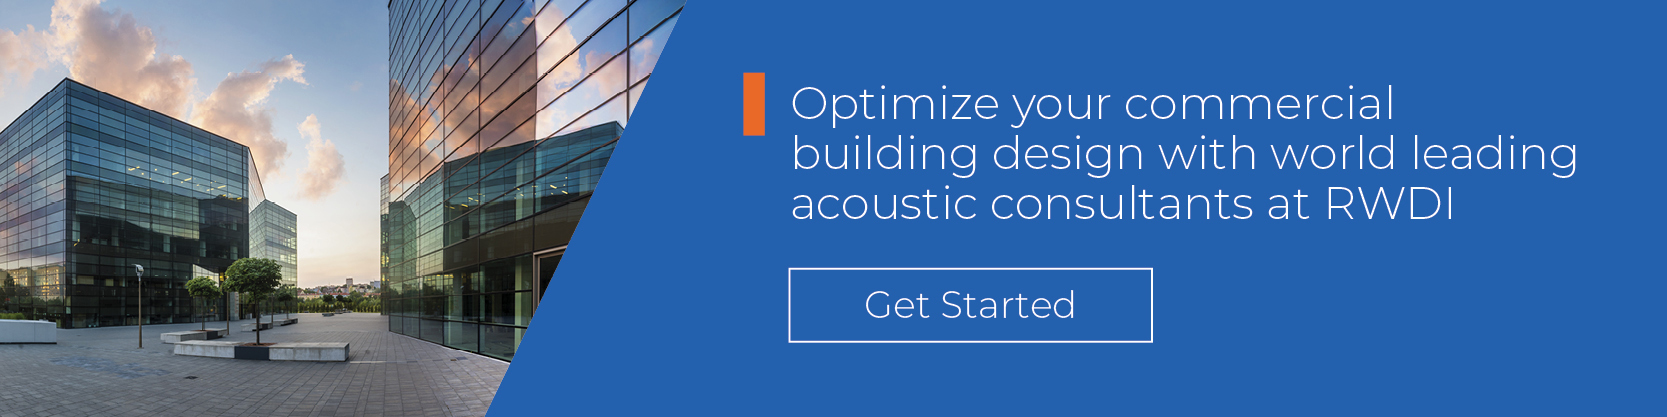 Optimize your commercial building with world leading acoustic consultants at RWDI